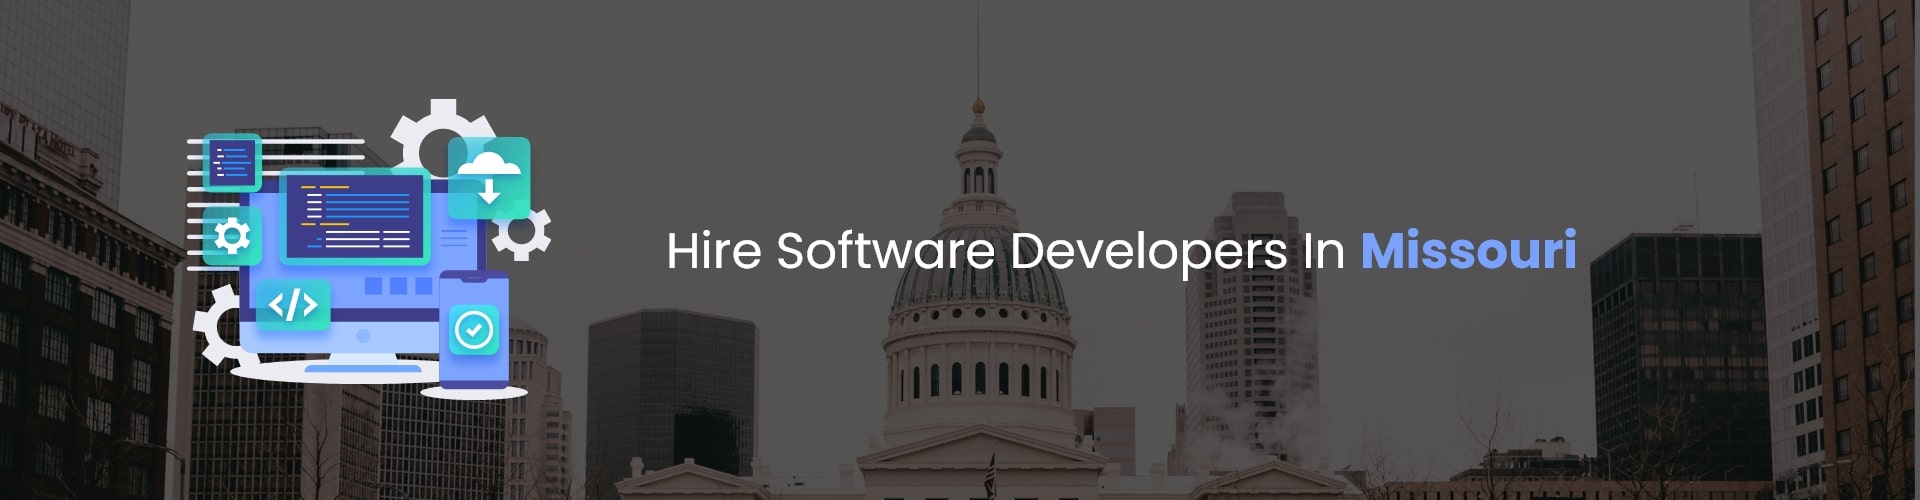 hire software developers in missouri